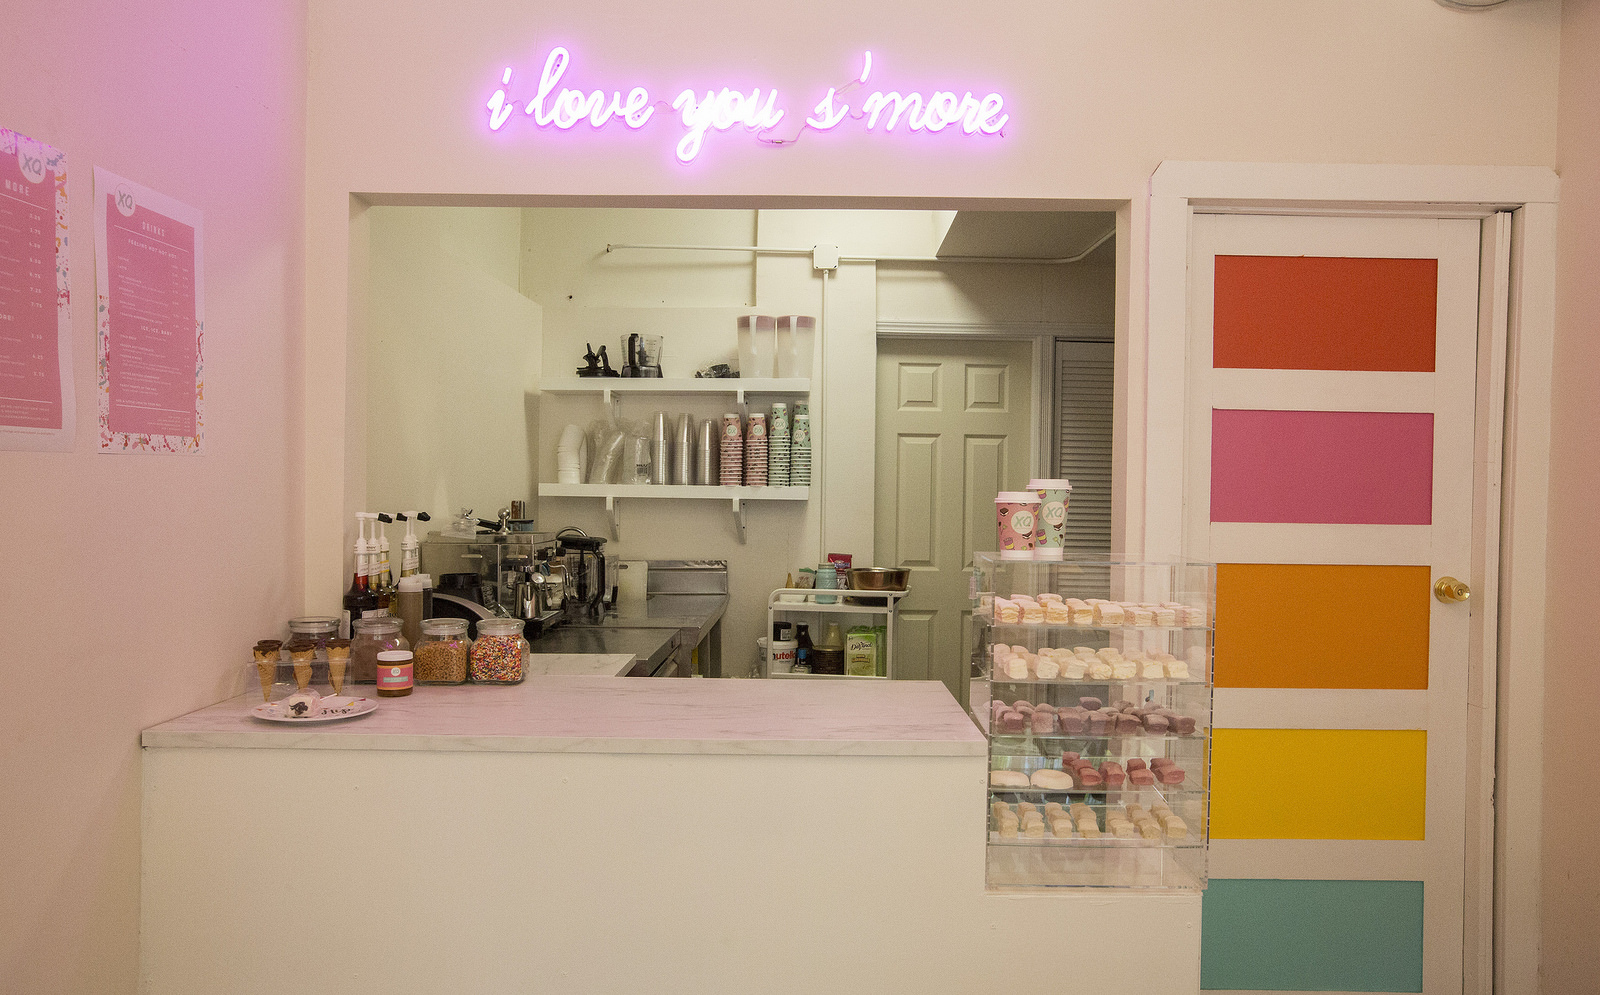 A pink counter with displays of marshmallows and disposable cups.